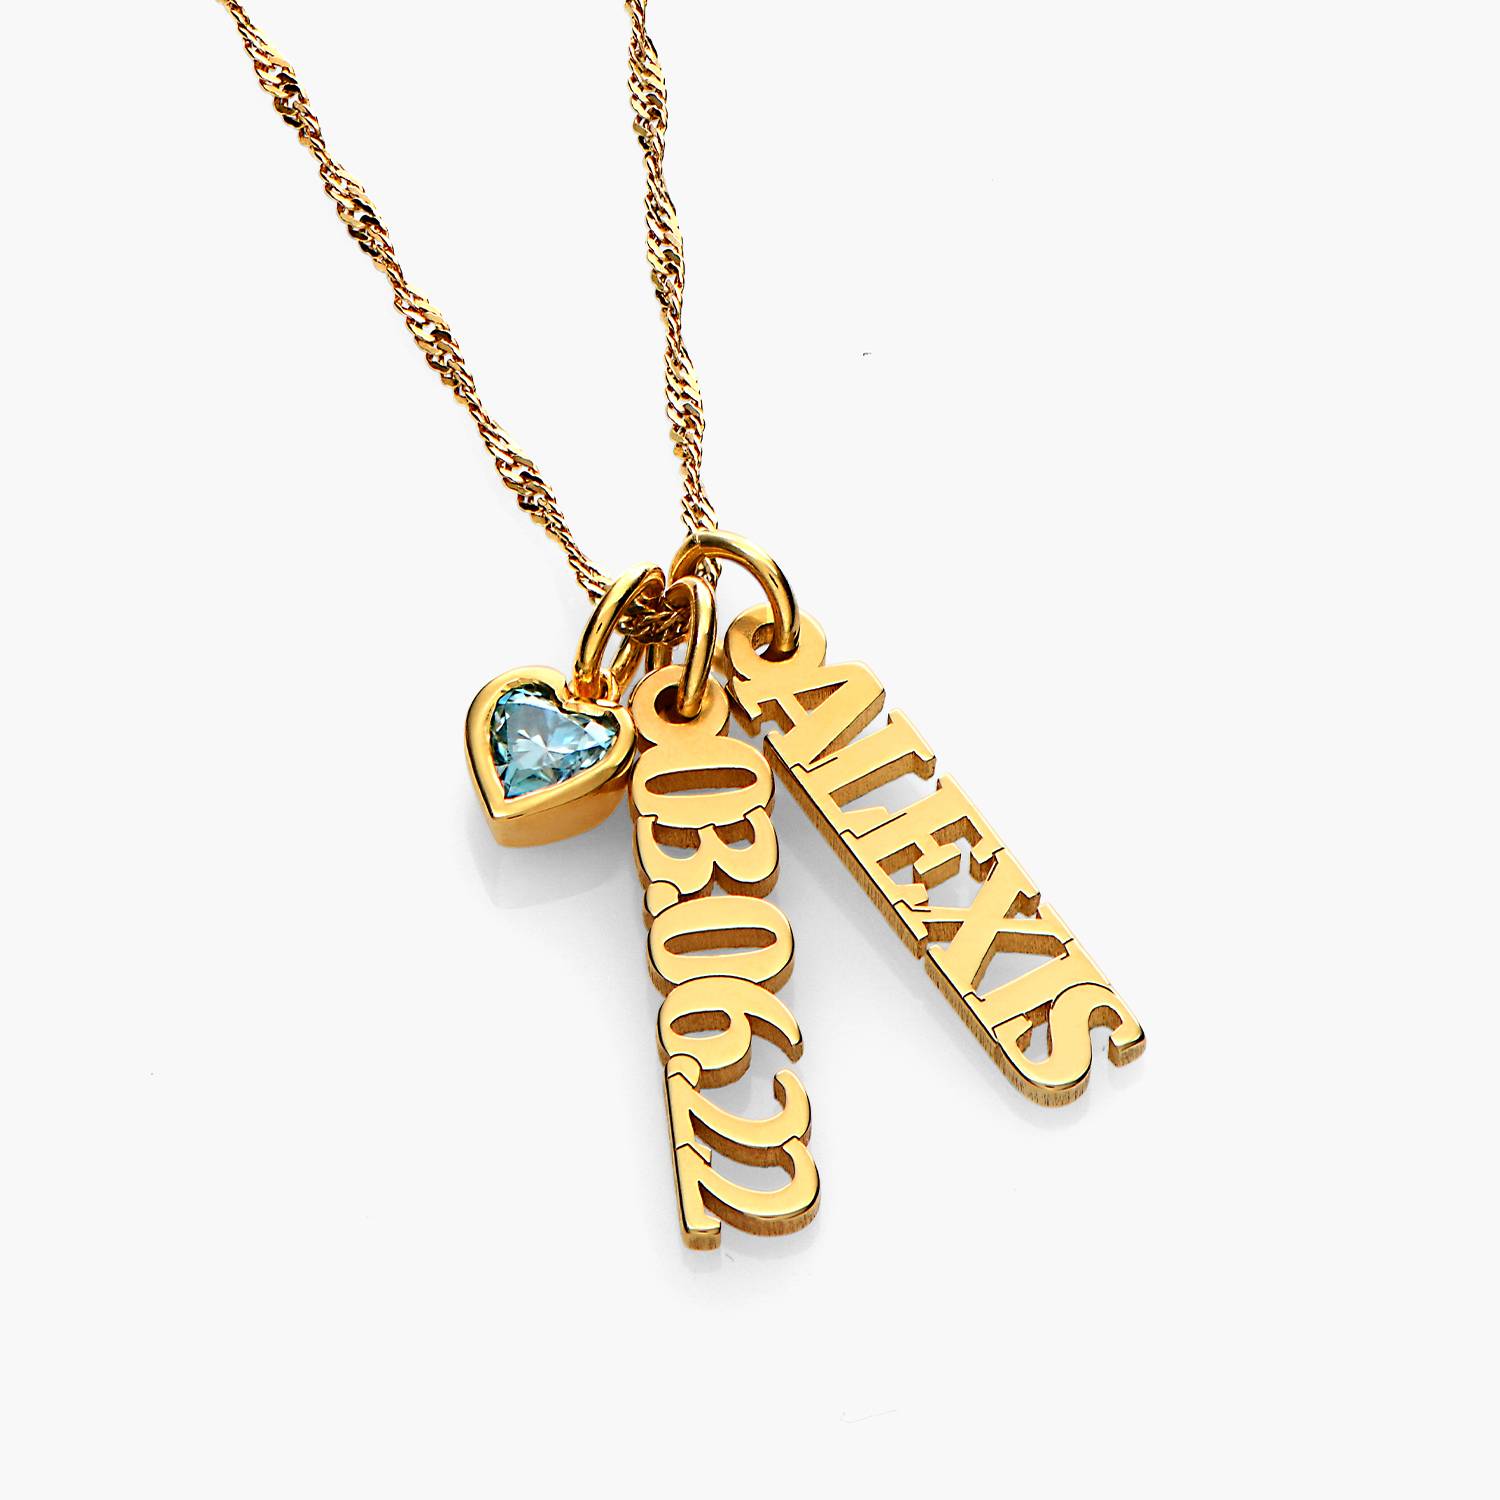 Singapore Chain Name Necklace With Heart Shaped Gemstone - Gold Vermeil product photo